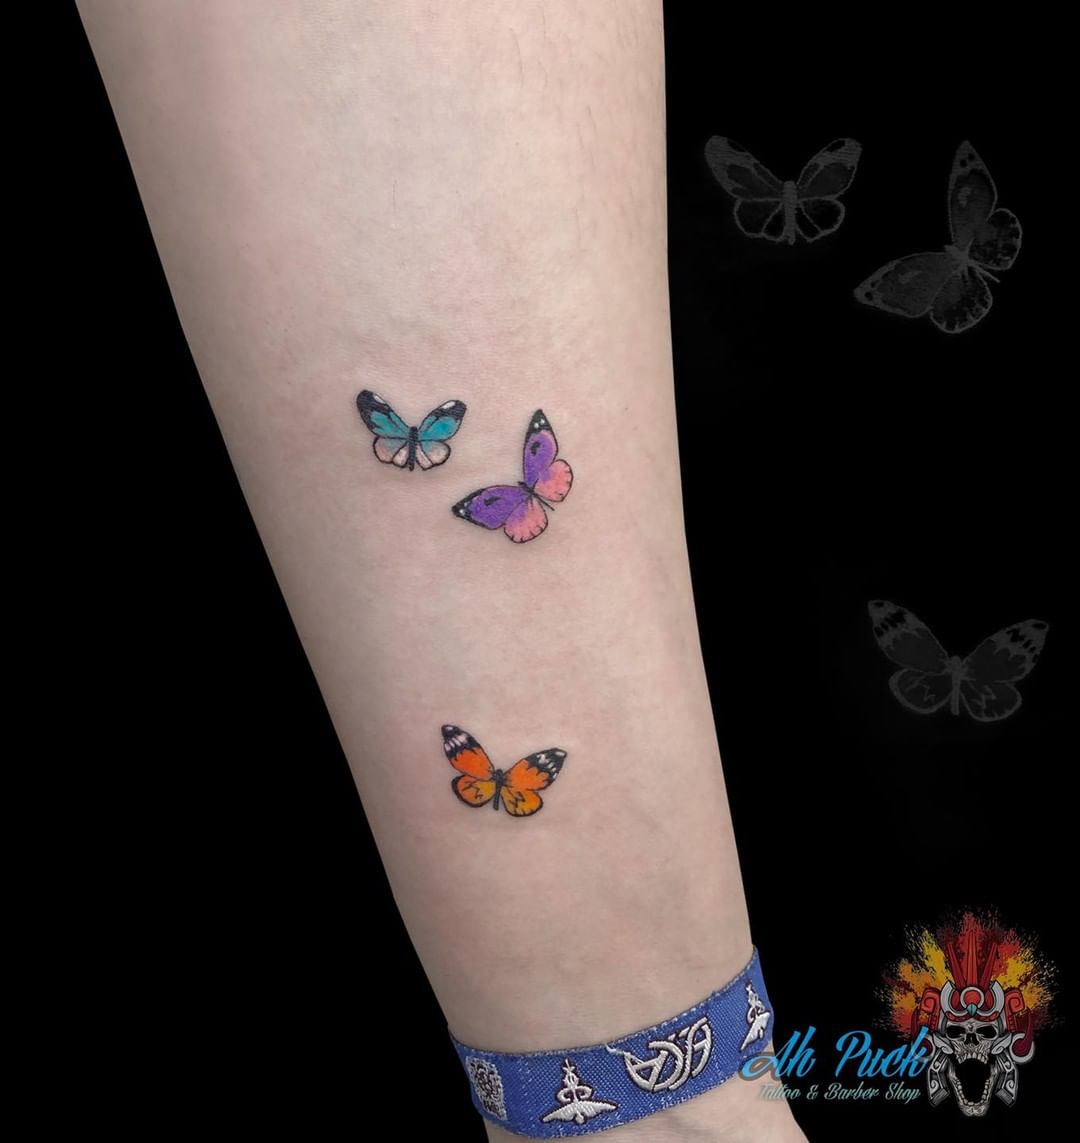 30+ Best Butterfly Tattoos Design You’ll Love To Get Next. Small Butterfly Tattoos